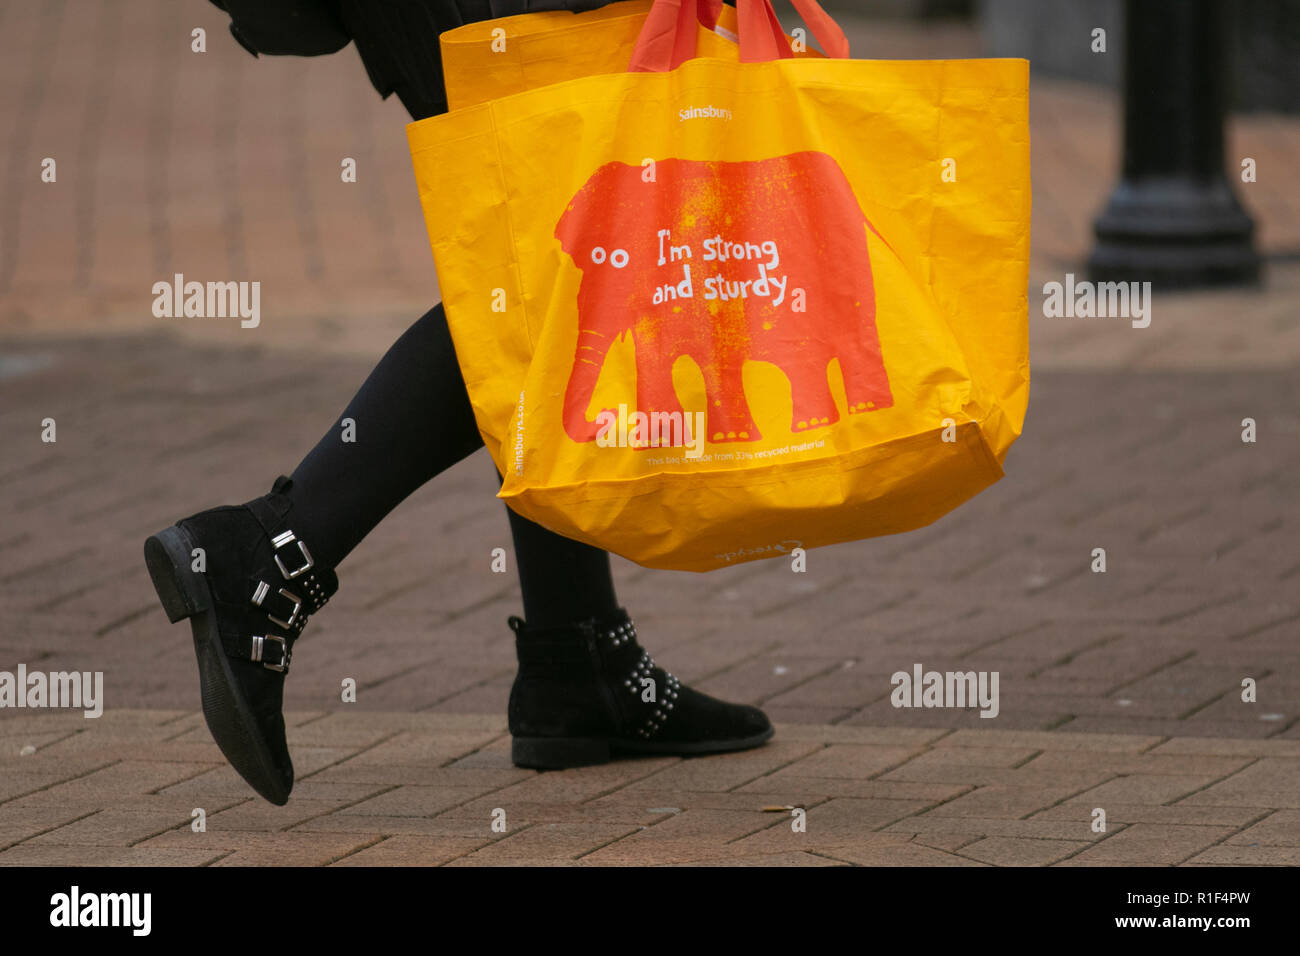 Saiinsburys Strong & Sturdy yellow reusable, recycle, recycling, reusable, shopping, consumerism, convenience, supermarket, plastic shopping, carrying bags, reusable bag for life, store bags for life supermarket 100% recycled plastic Carrier Bags for Life, Preston, UK Stock Photo